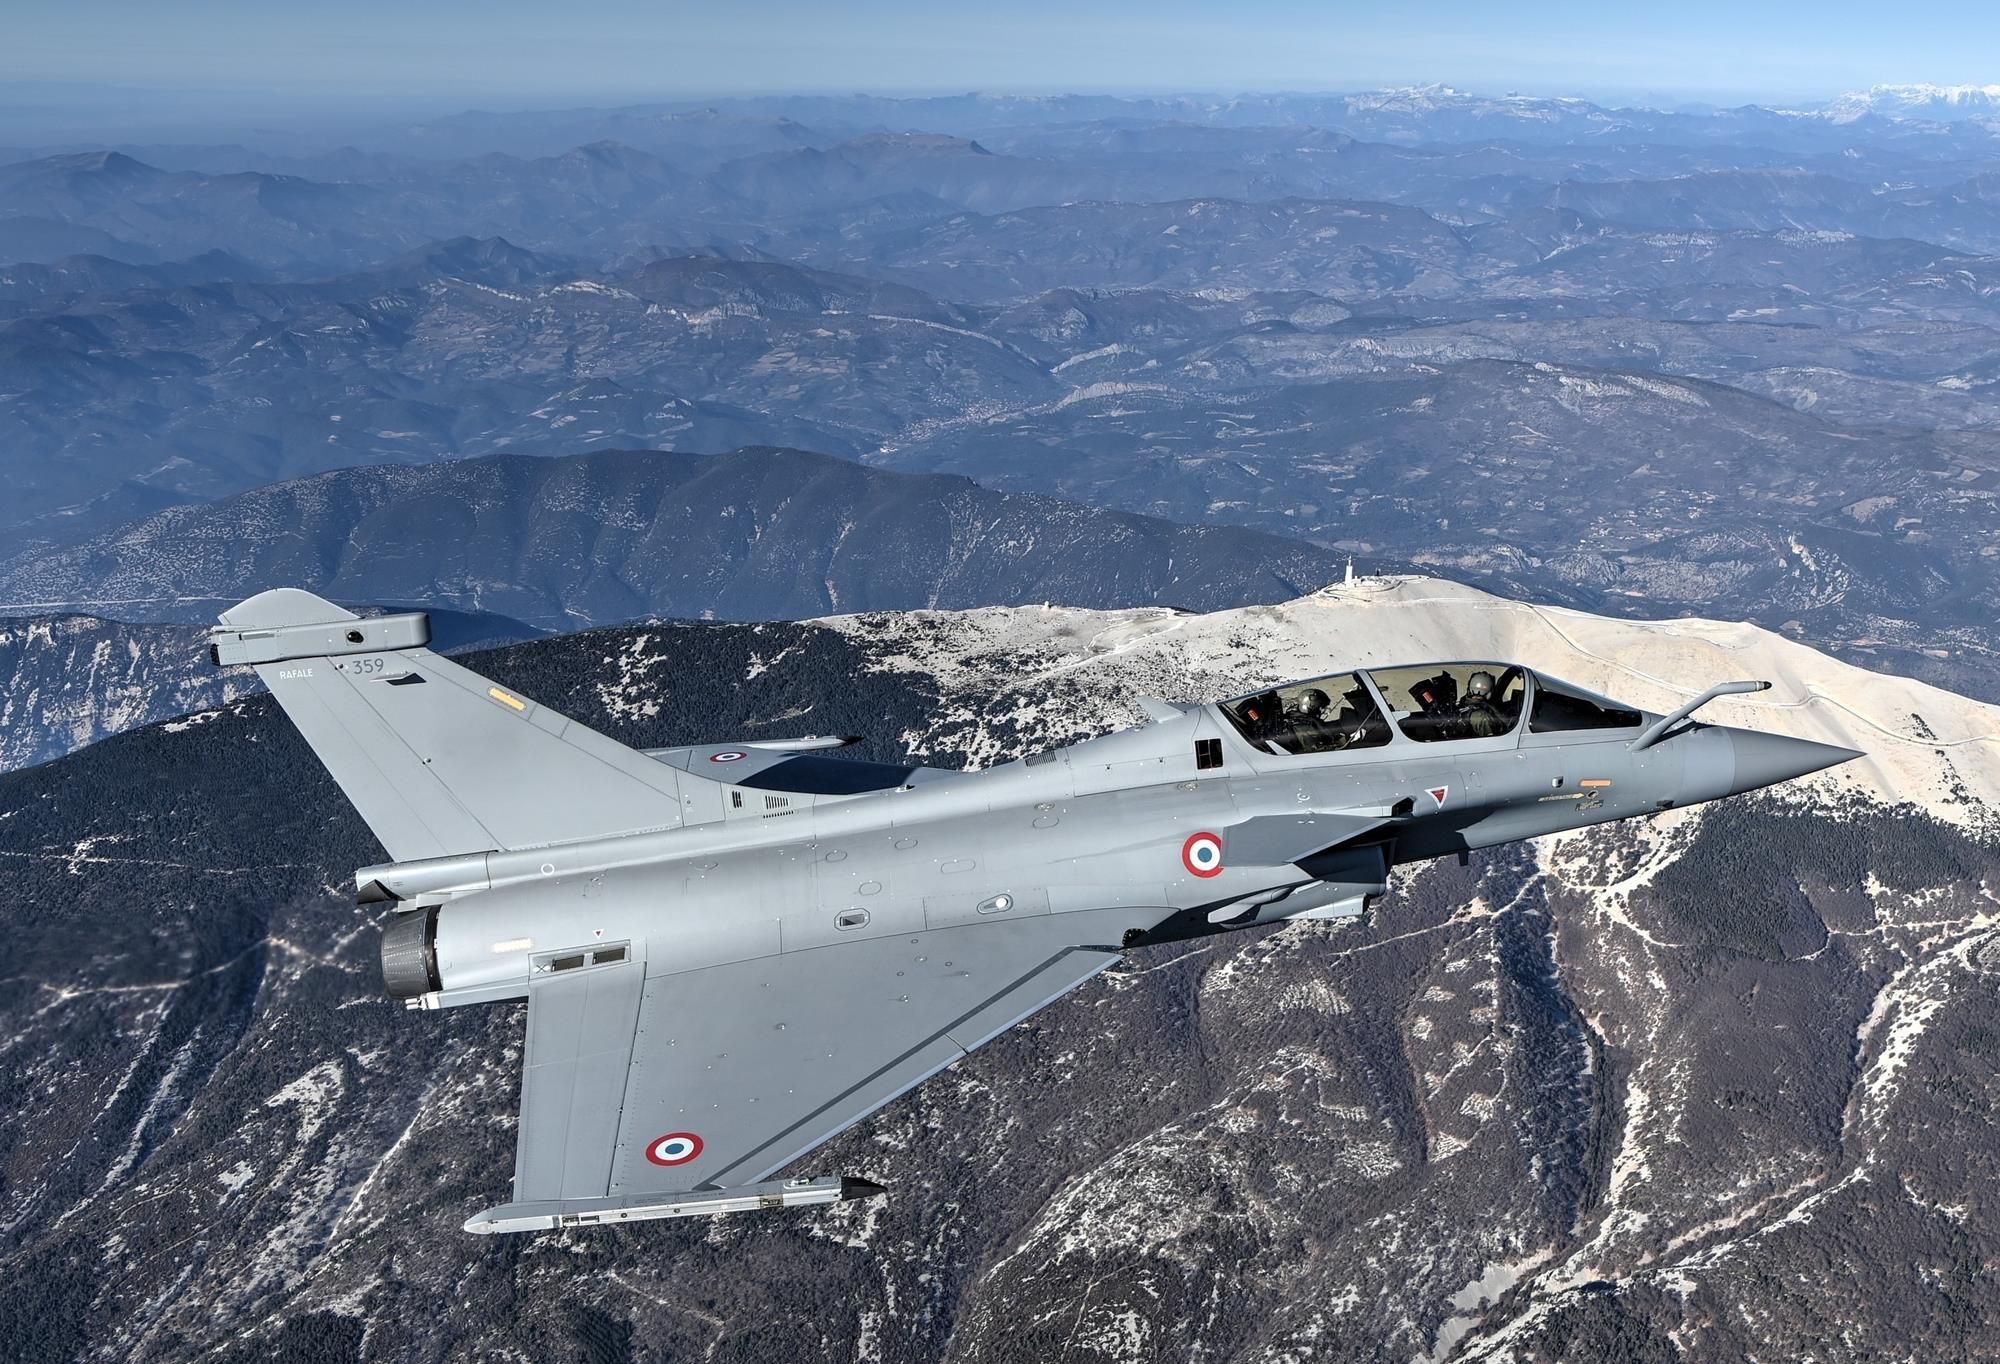 Saudi Arabia  Has  Asked  For  an  Offer  of  54 Rafale fighter jets  From  French manufacturer  Dassault.